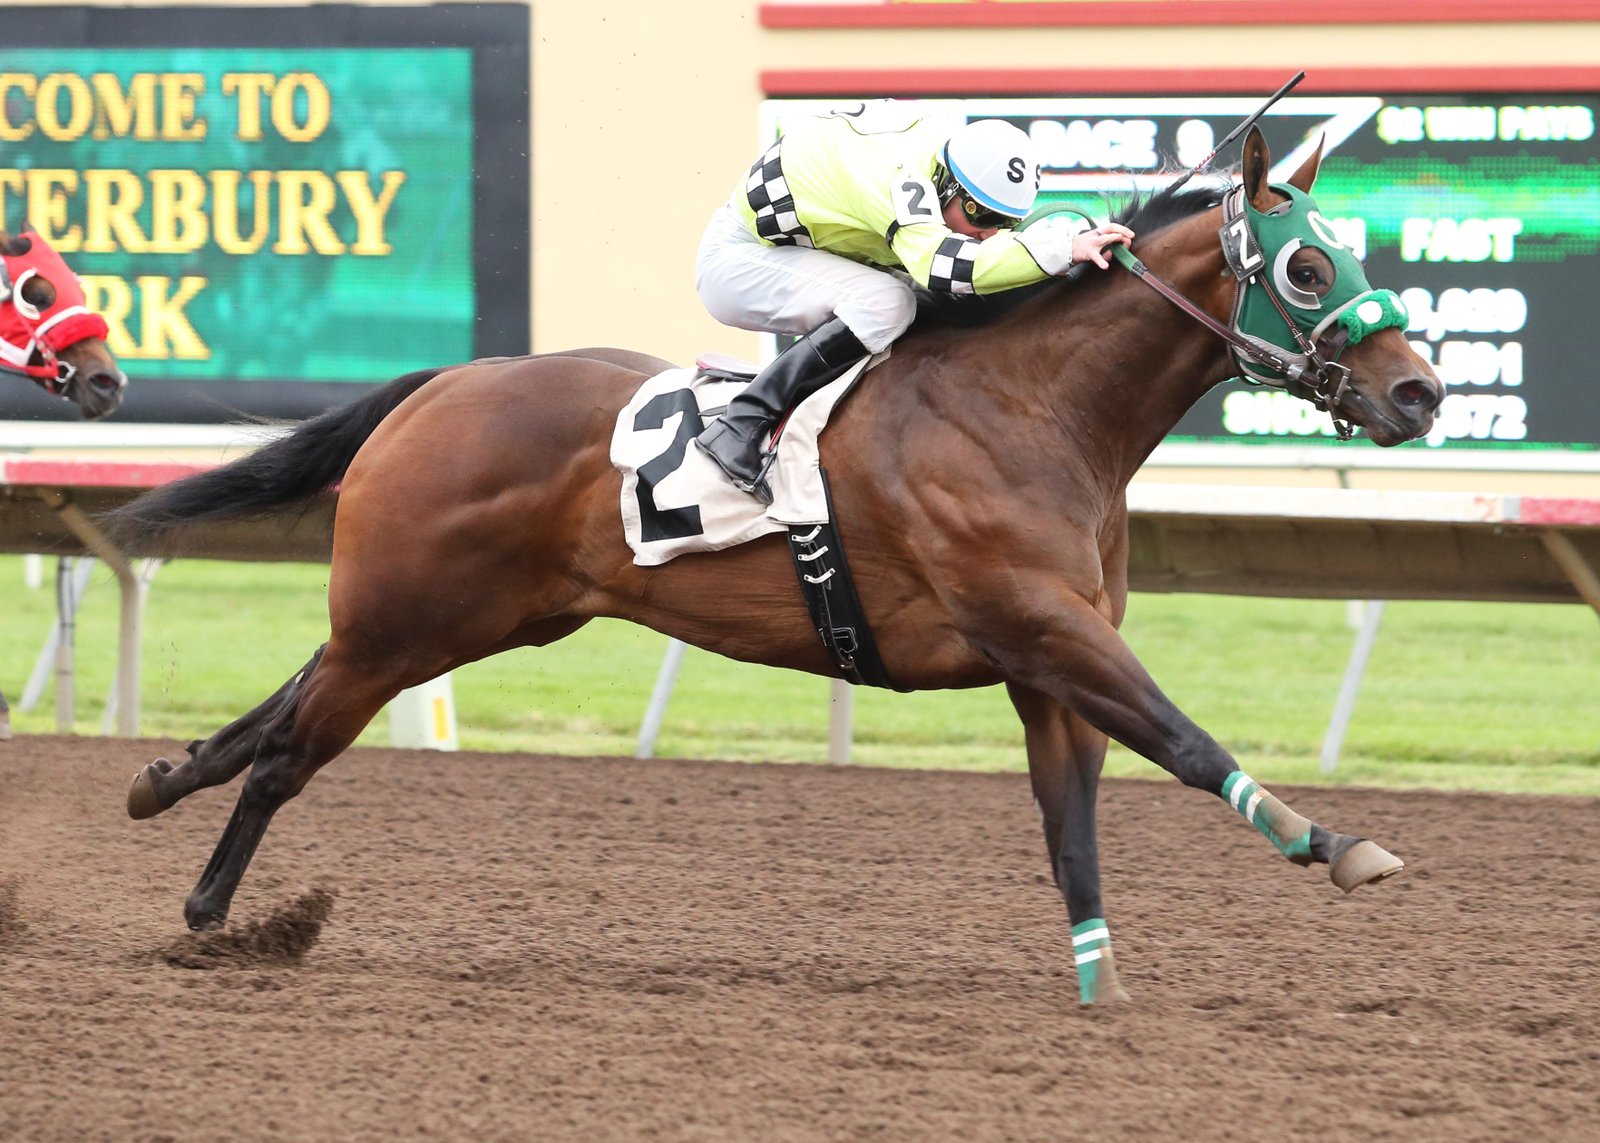 Western Fun - The Bob Morehouse Stakes - 07-27-13 - R09 - CBY - Finish